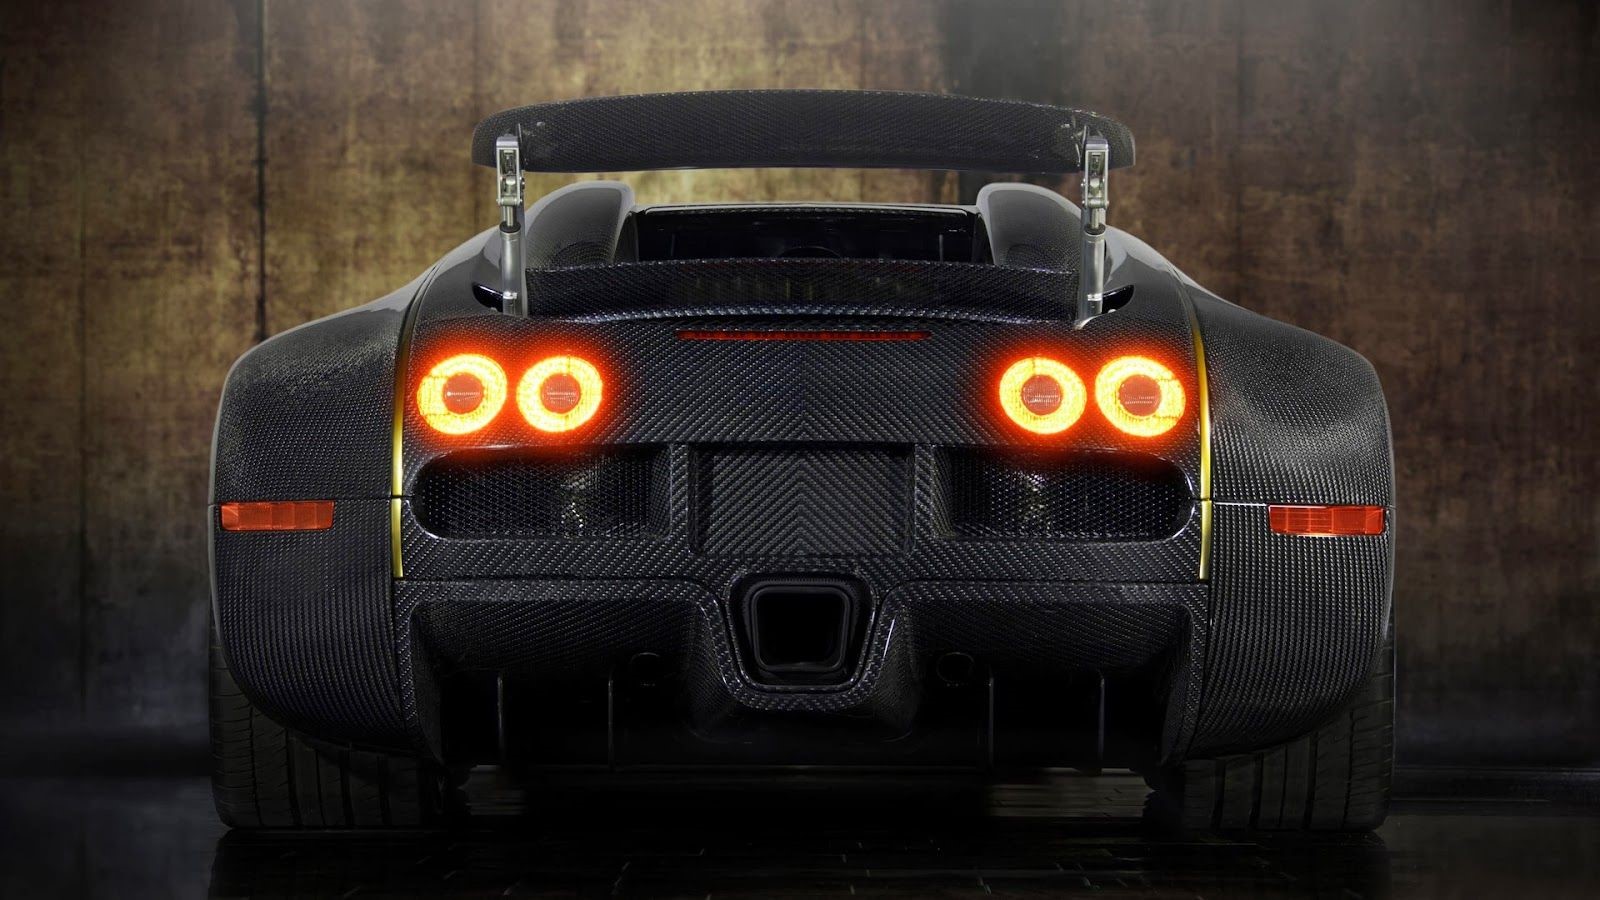 4k Modified Supercars Android Wallpaper High